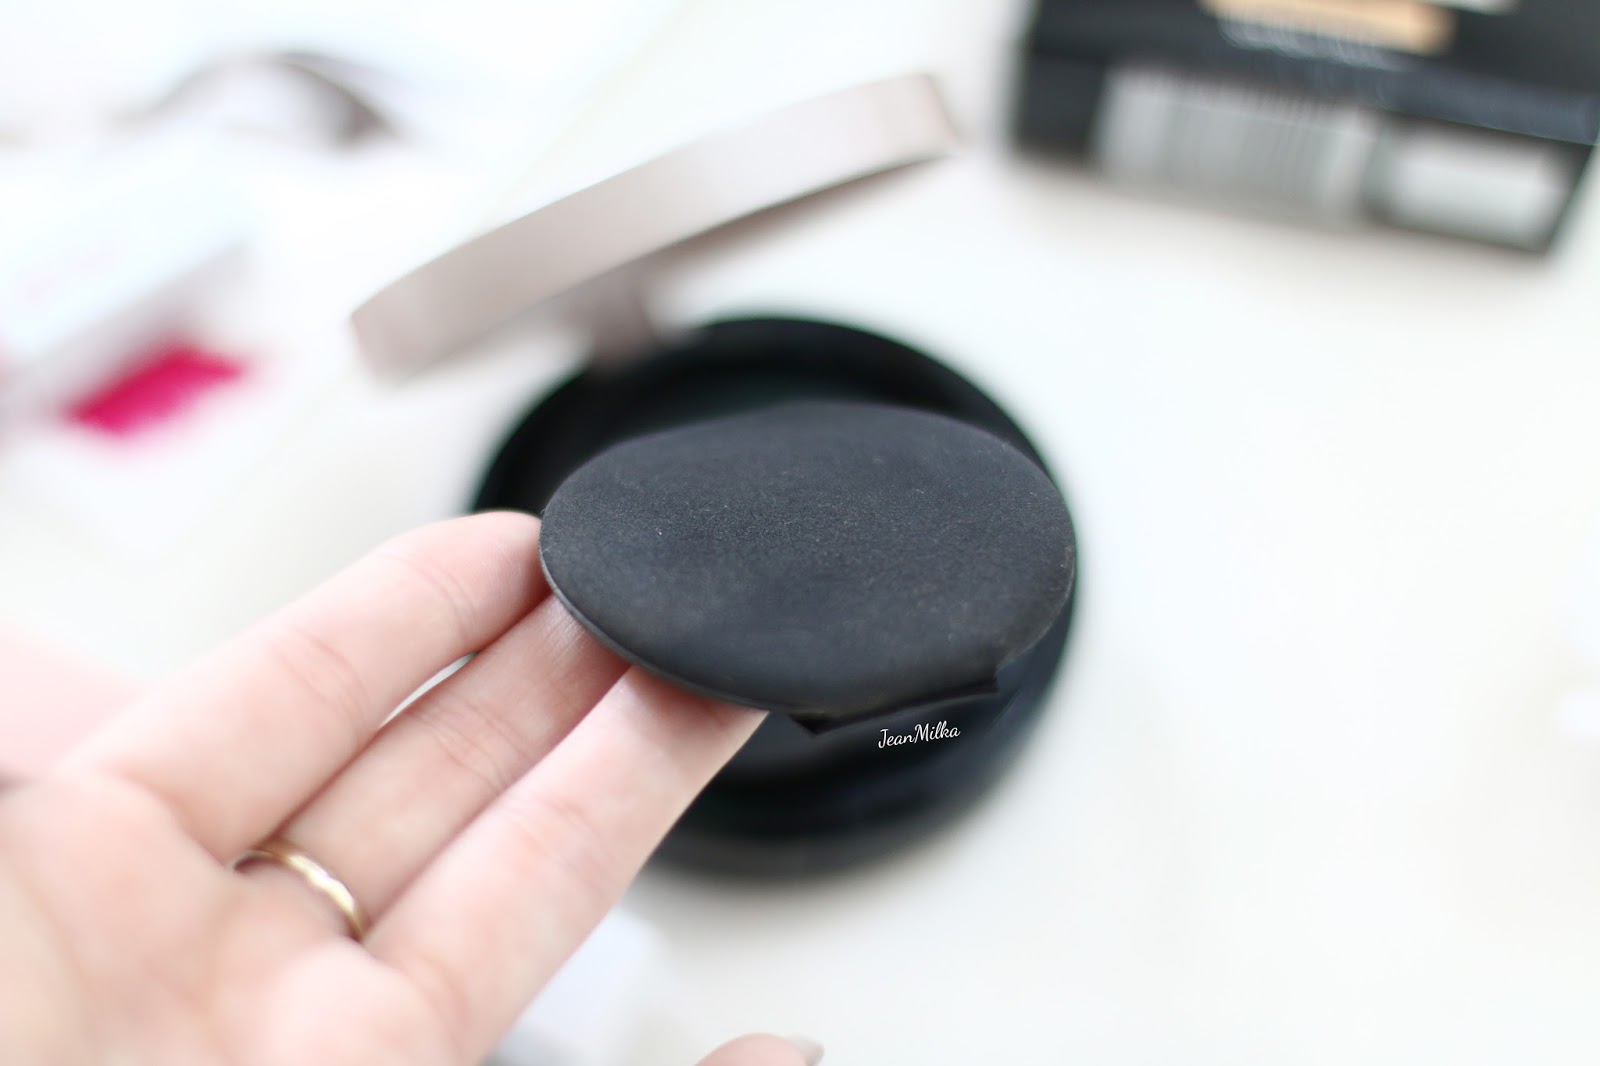 maybelline, maybelline super cushion, maybelline ultra cover cushion, maybelline indonesia, cushion, full coverage cushion, review cushion, makeup, drugstore makeup, maybelline cushion